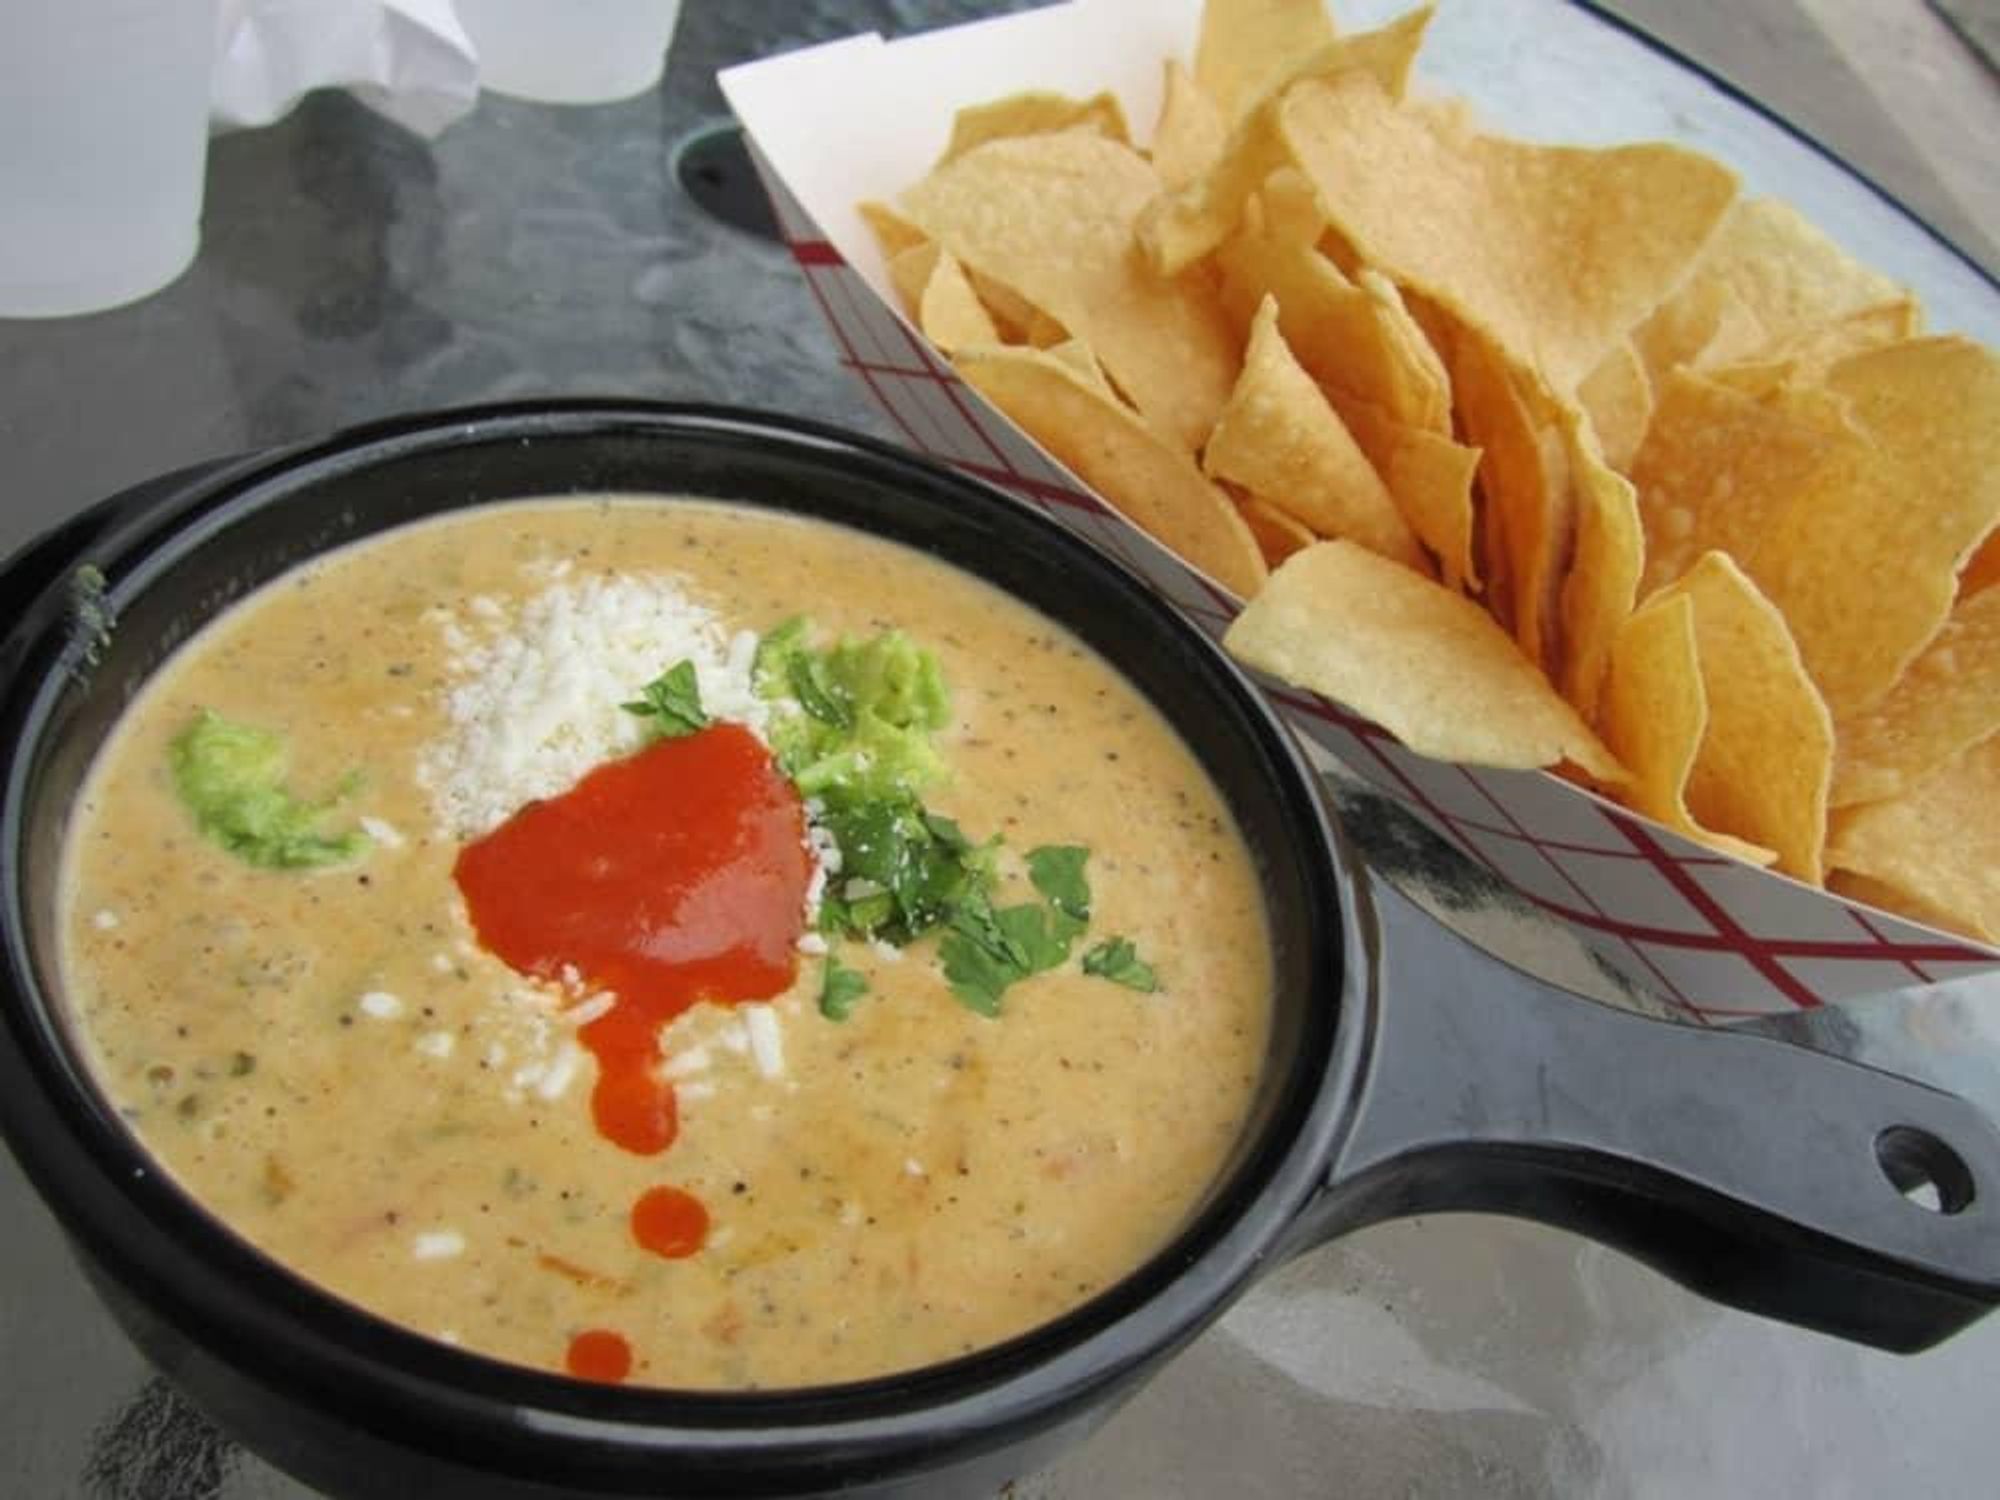 Torchy's Tacos queso and chips